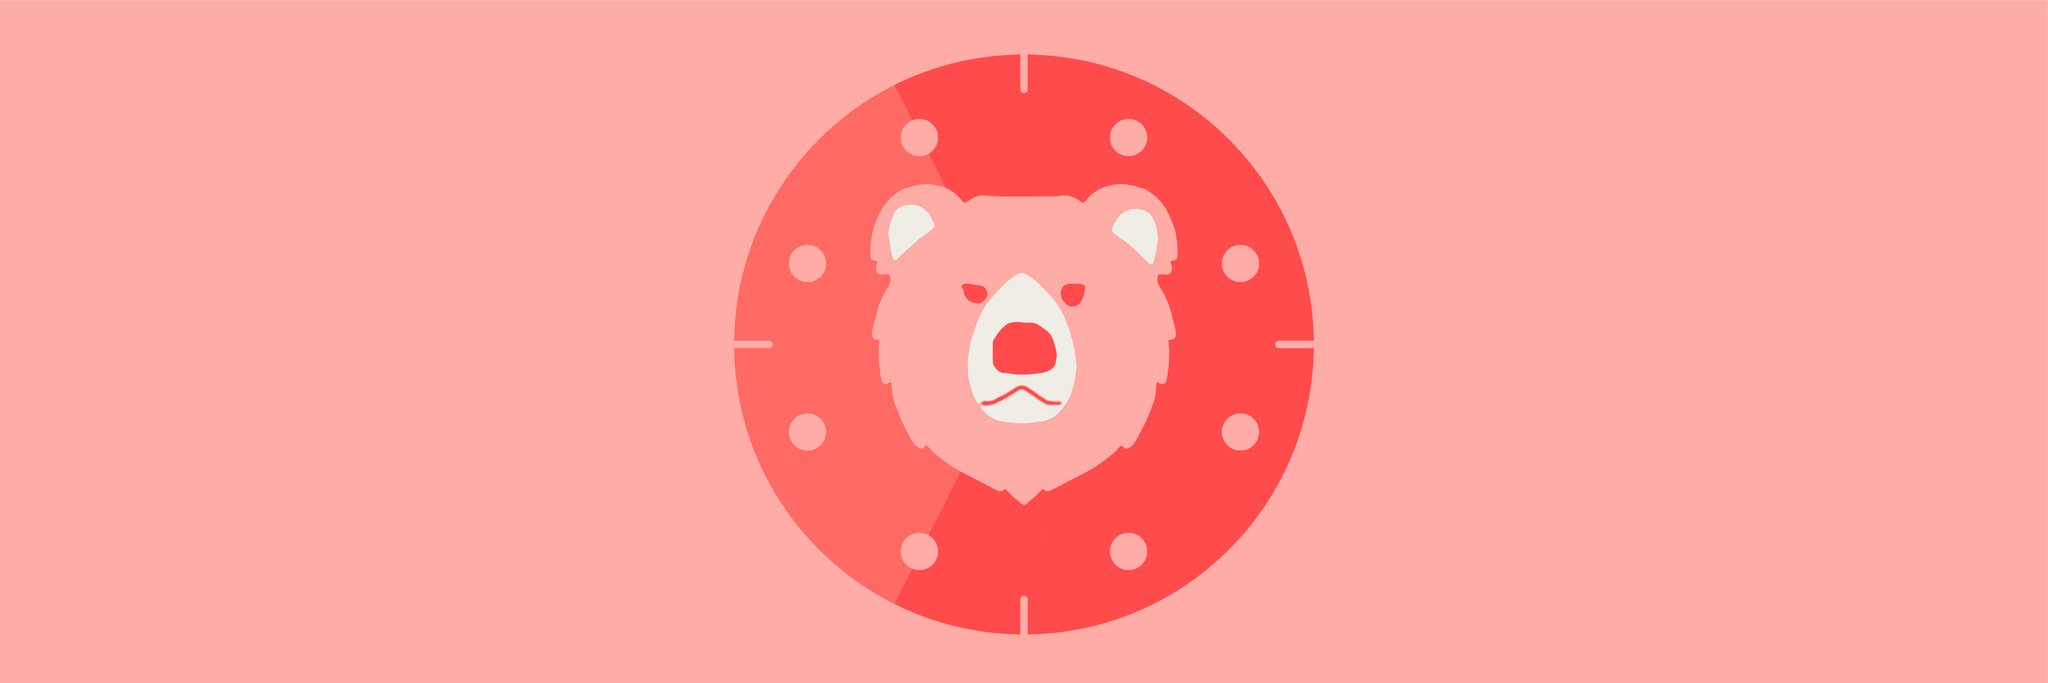 The head of a bear in the center of a clock represents the bear chronotype.